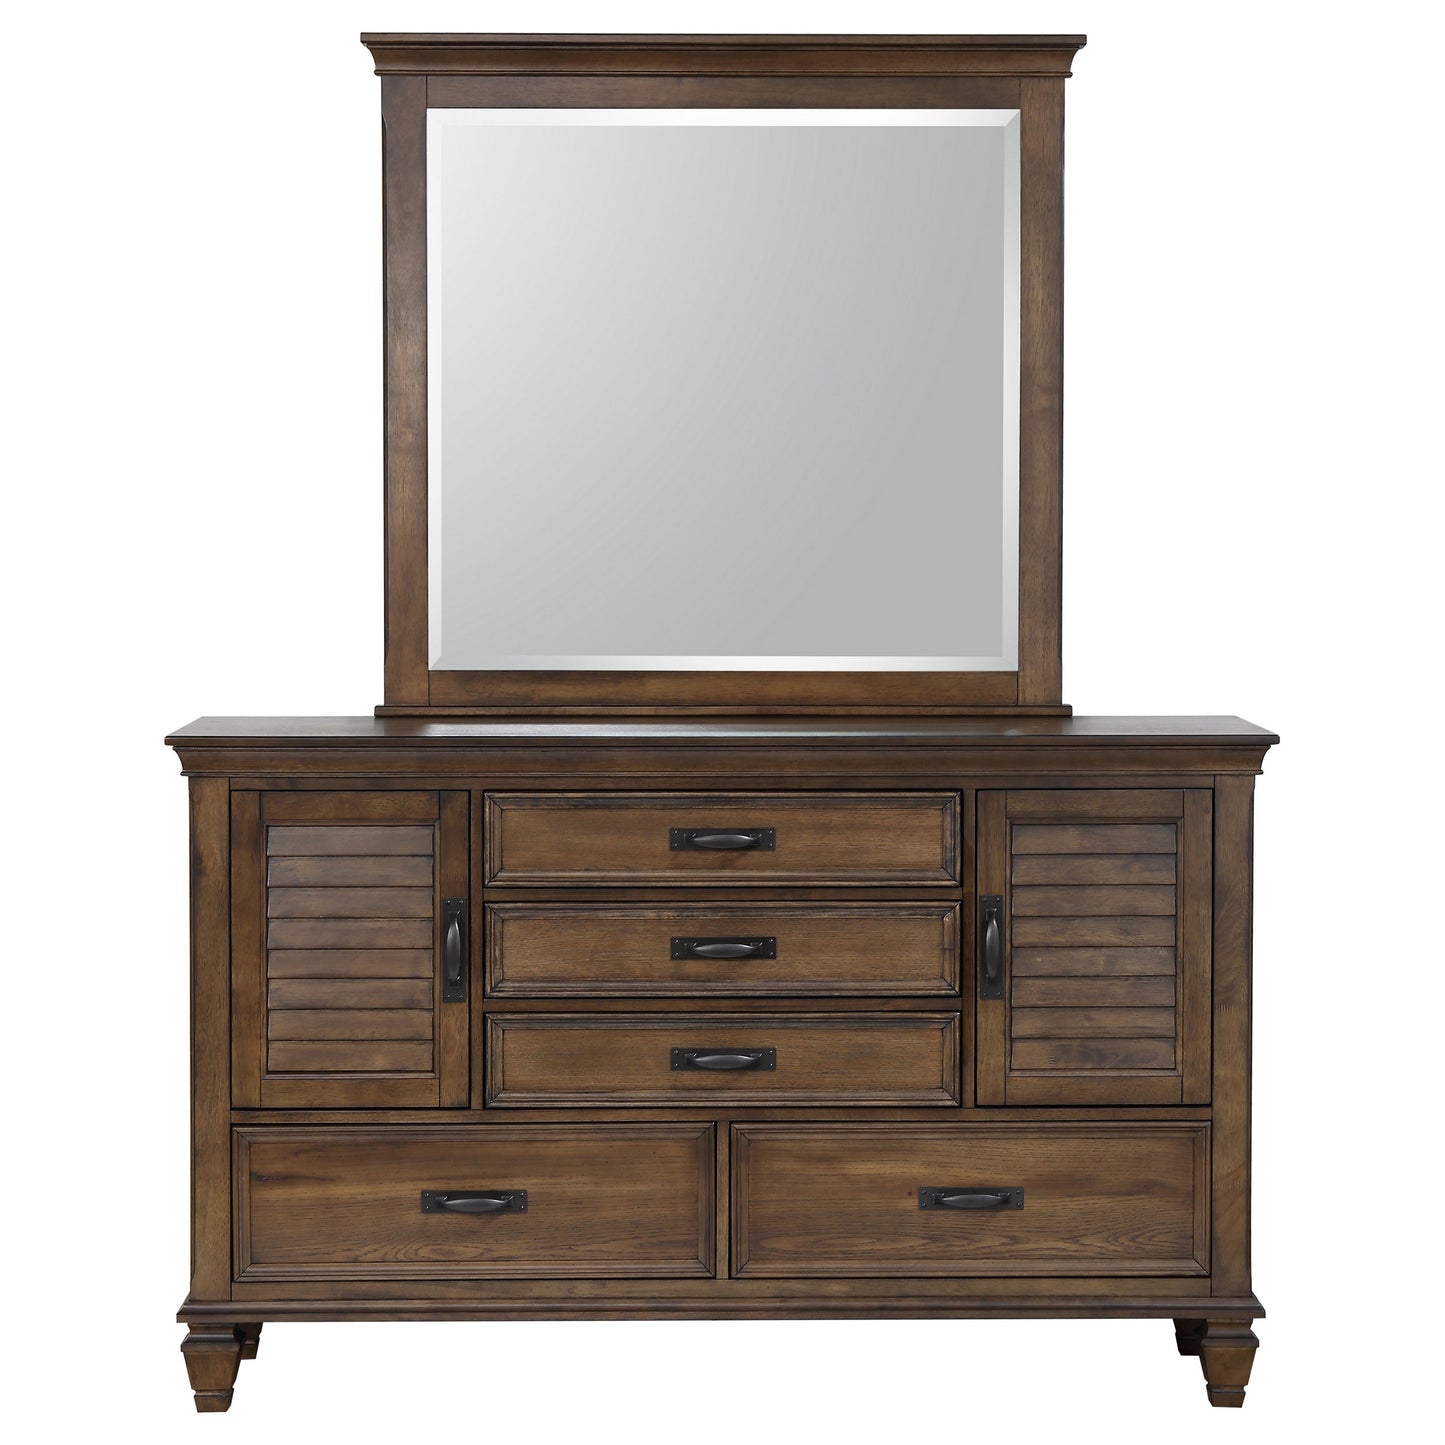 Franco 5-drawer Dresser with Mirror with 2 Louvered Doors Burnished Oak